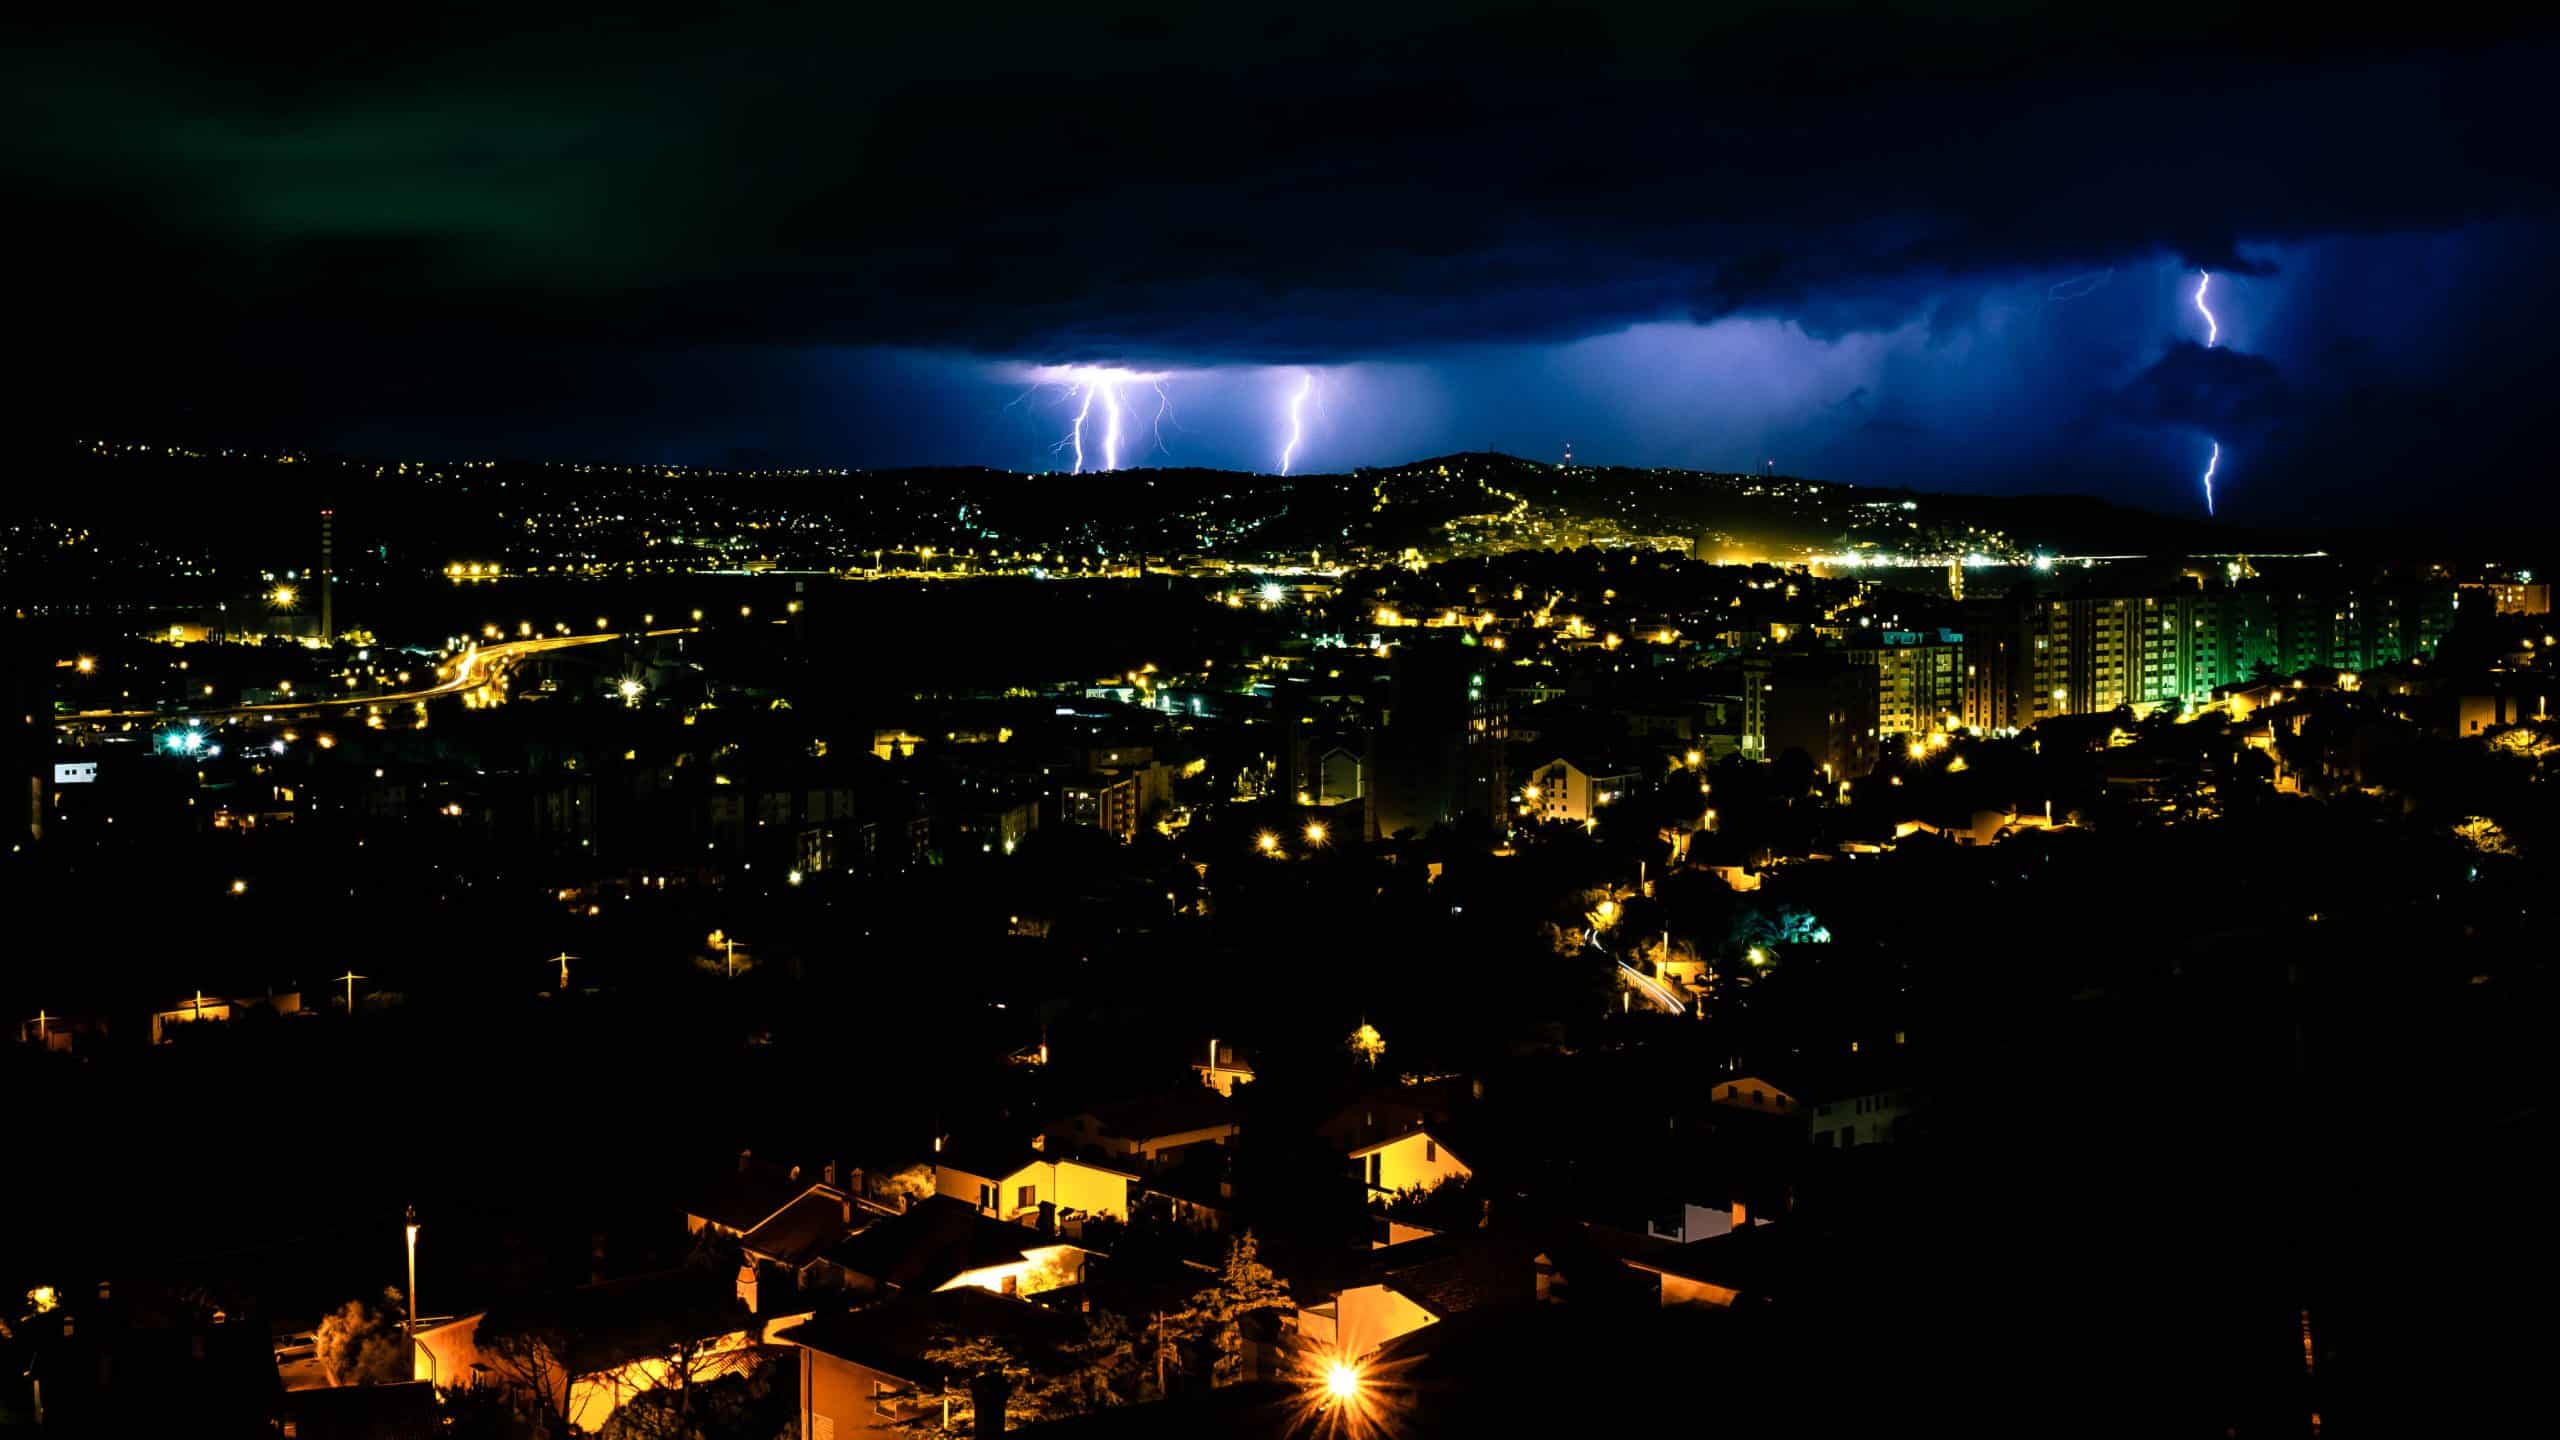 Photo credit: “Thunderstorm” by Paolo Braiuca, licensed under CC BY 2.0.